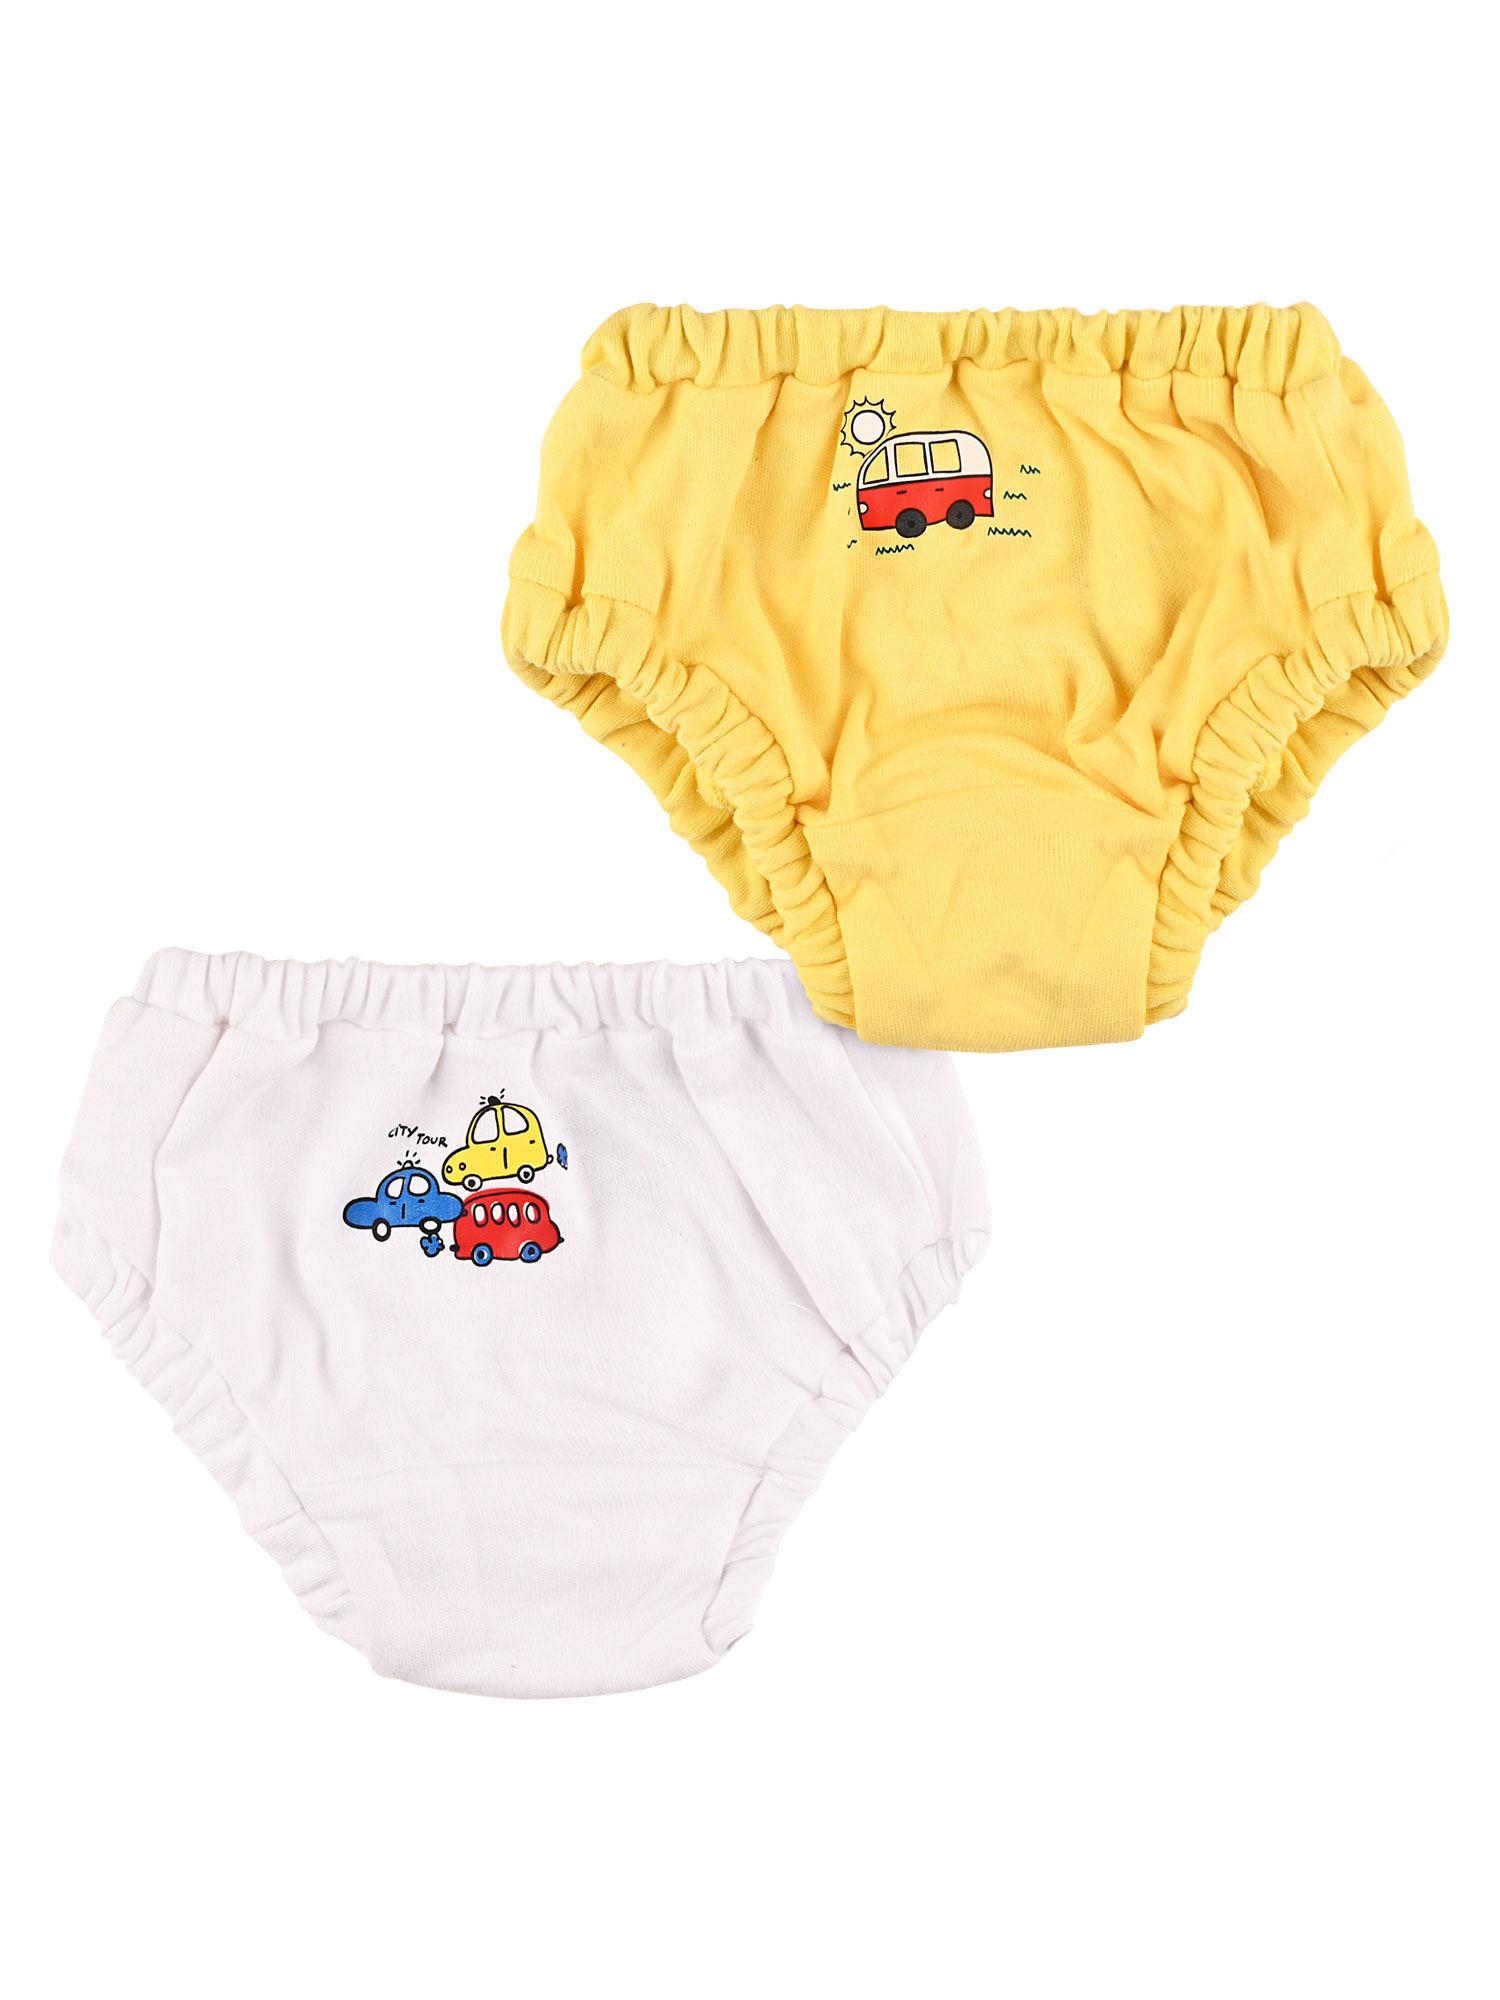 baby-boys-printed-bloomer-brief-underwear-yellow-and-white-(pack-of-2)